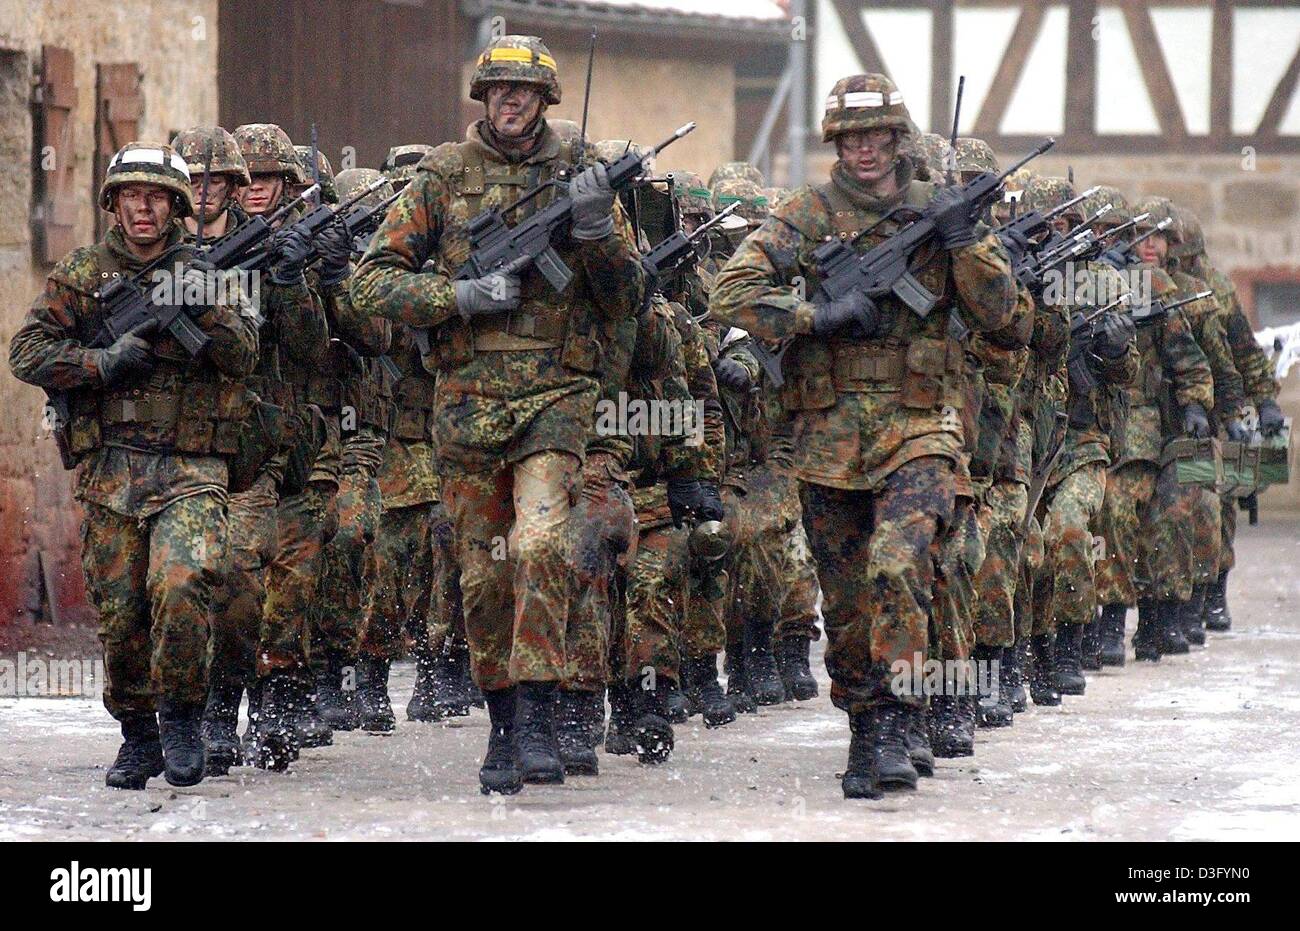 (dpa) - A platoon of the Infantry School of the German Bundeswehr marches through the uninhabited village 'Bonnland' in Hammelburg, Germany, 3 February 2003. 'Bonnland' is a village of vacated and empty buildings used as scenery for military drills. The 100-year-old houses have no window panes and no furniture, which makes them an ideal site for the training of how to conquer villa Stock Photo